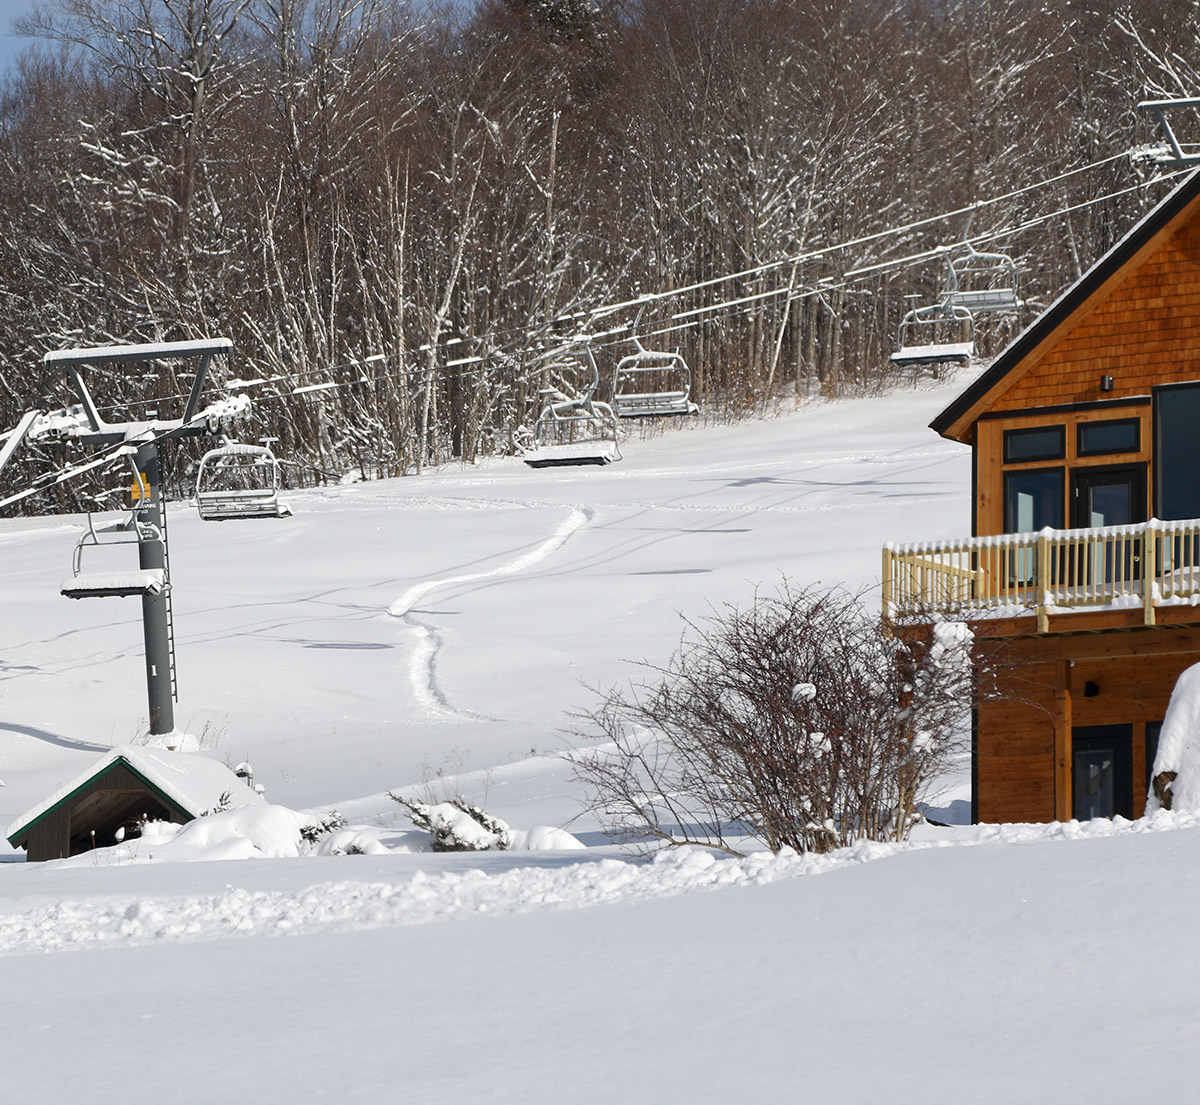 An image of the Timberline Base at Bolton Valley Ski Resort in Vermont after Winter Storm Izzy